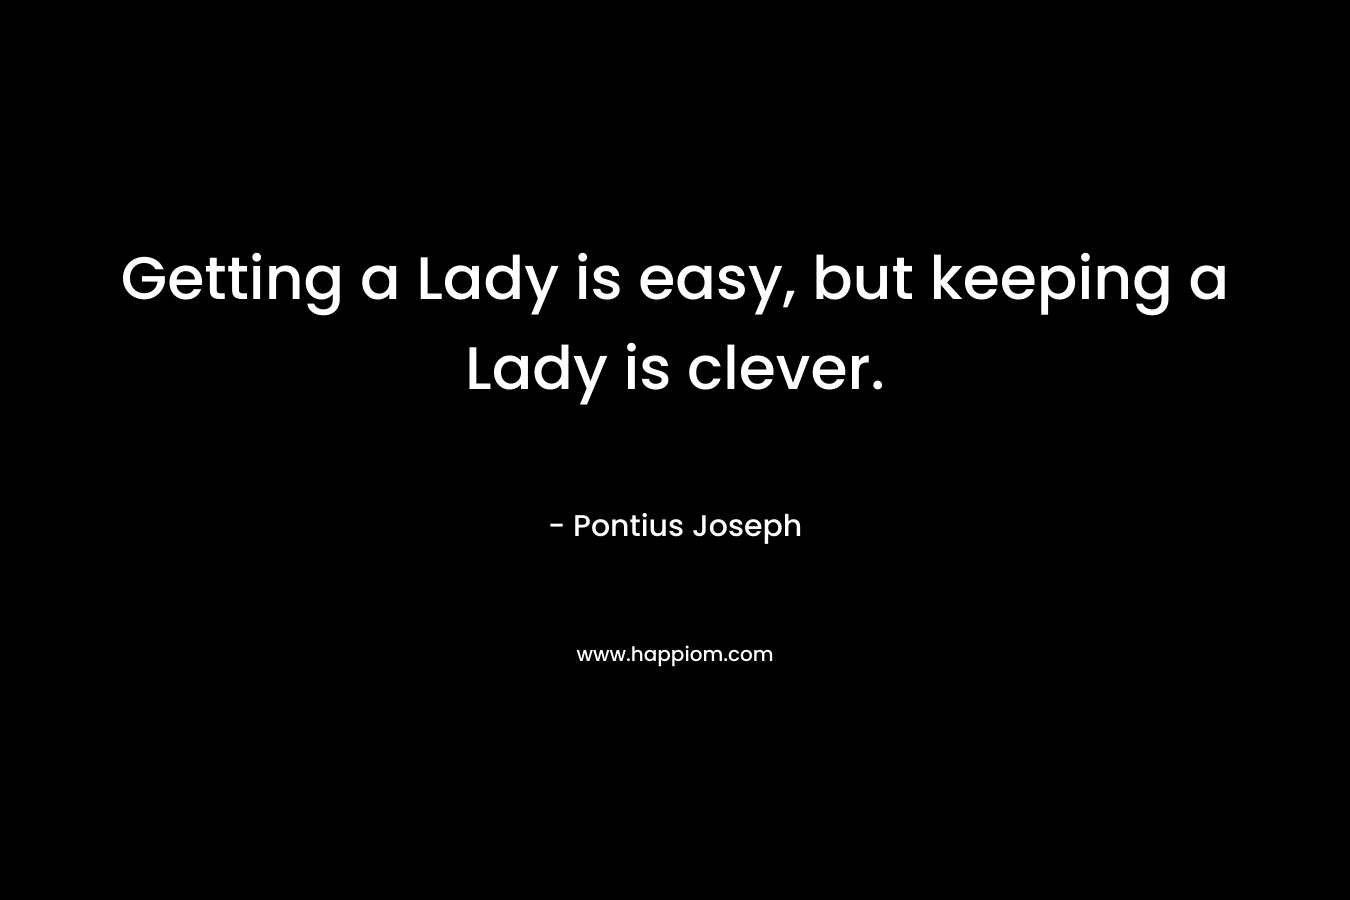 Getting a Lady is easy, but keeping a Lady is clever. – Pontius Joseph